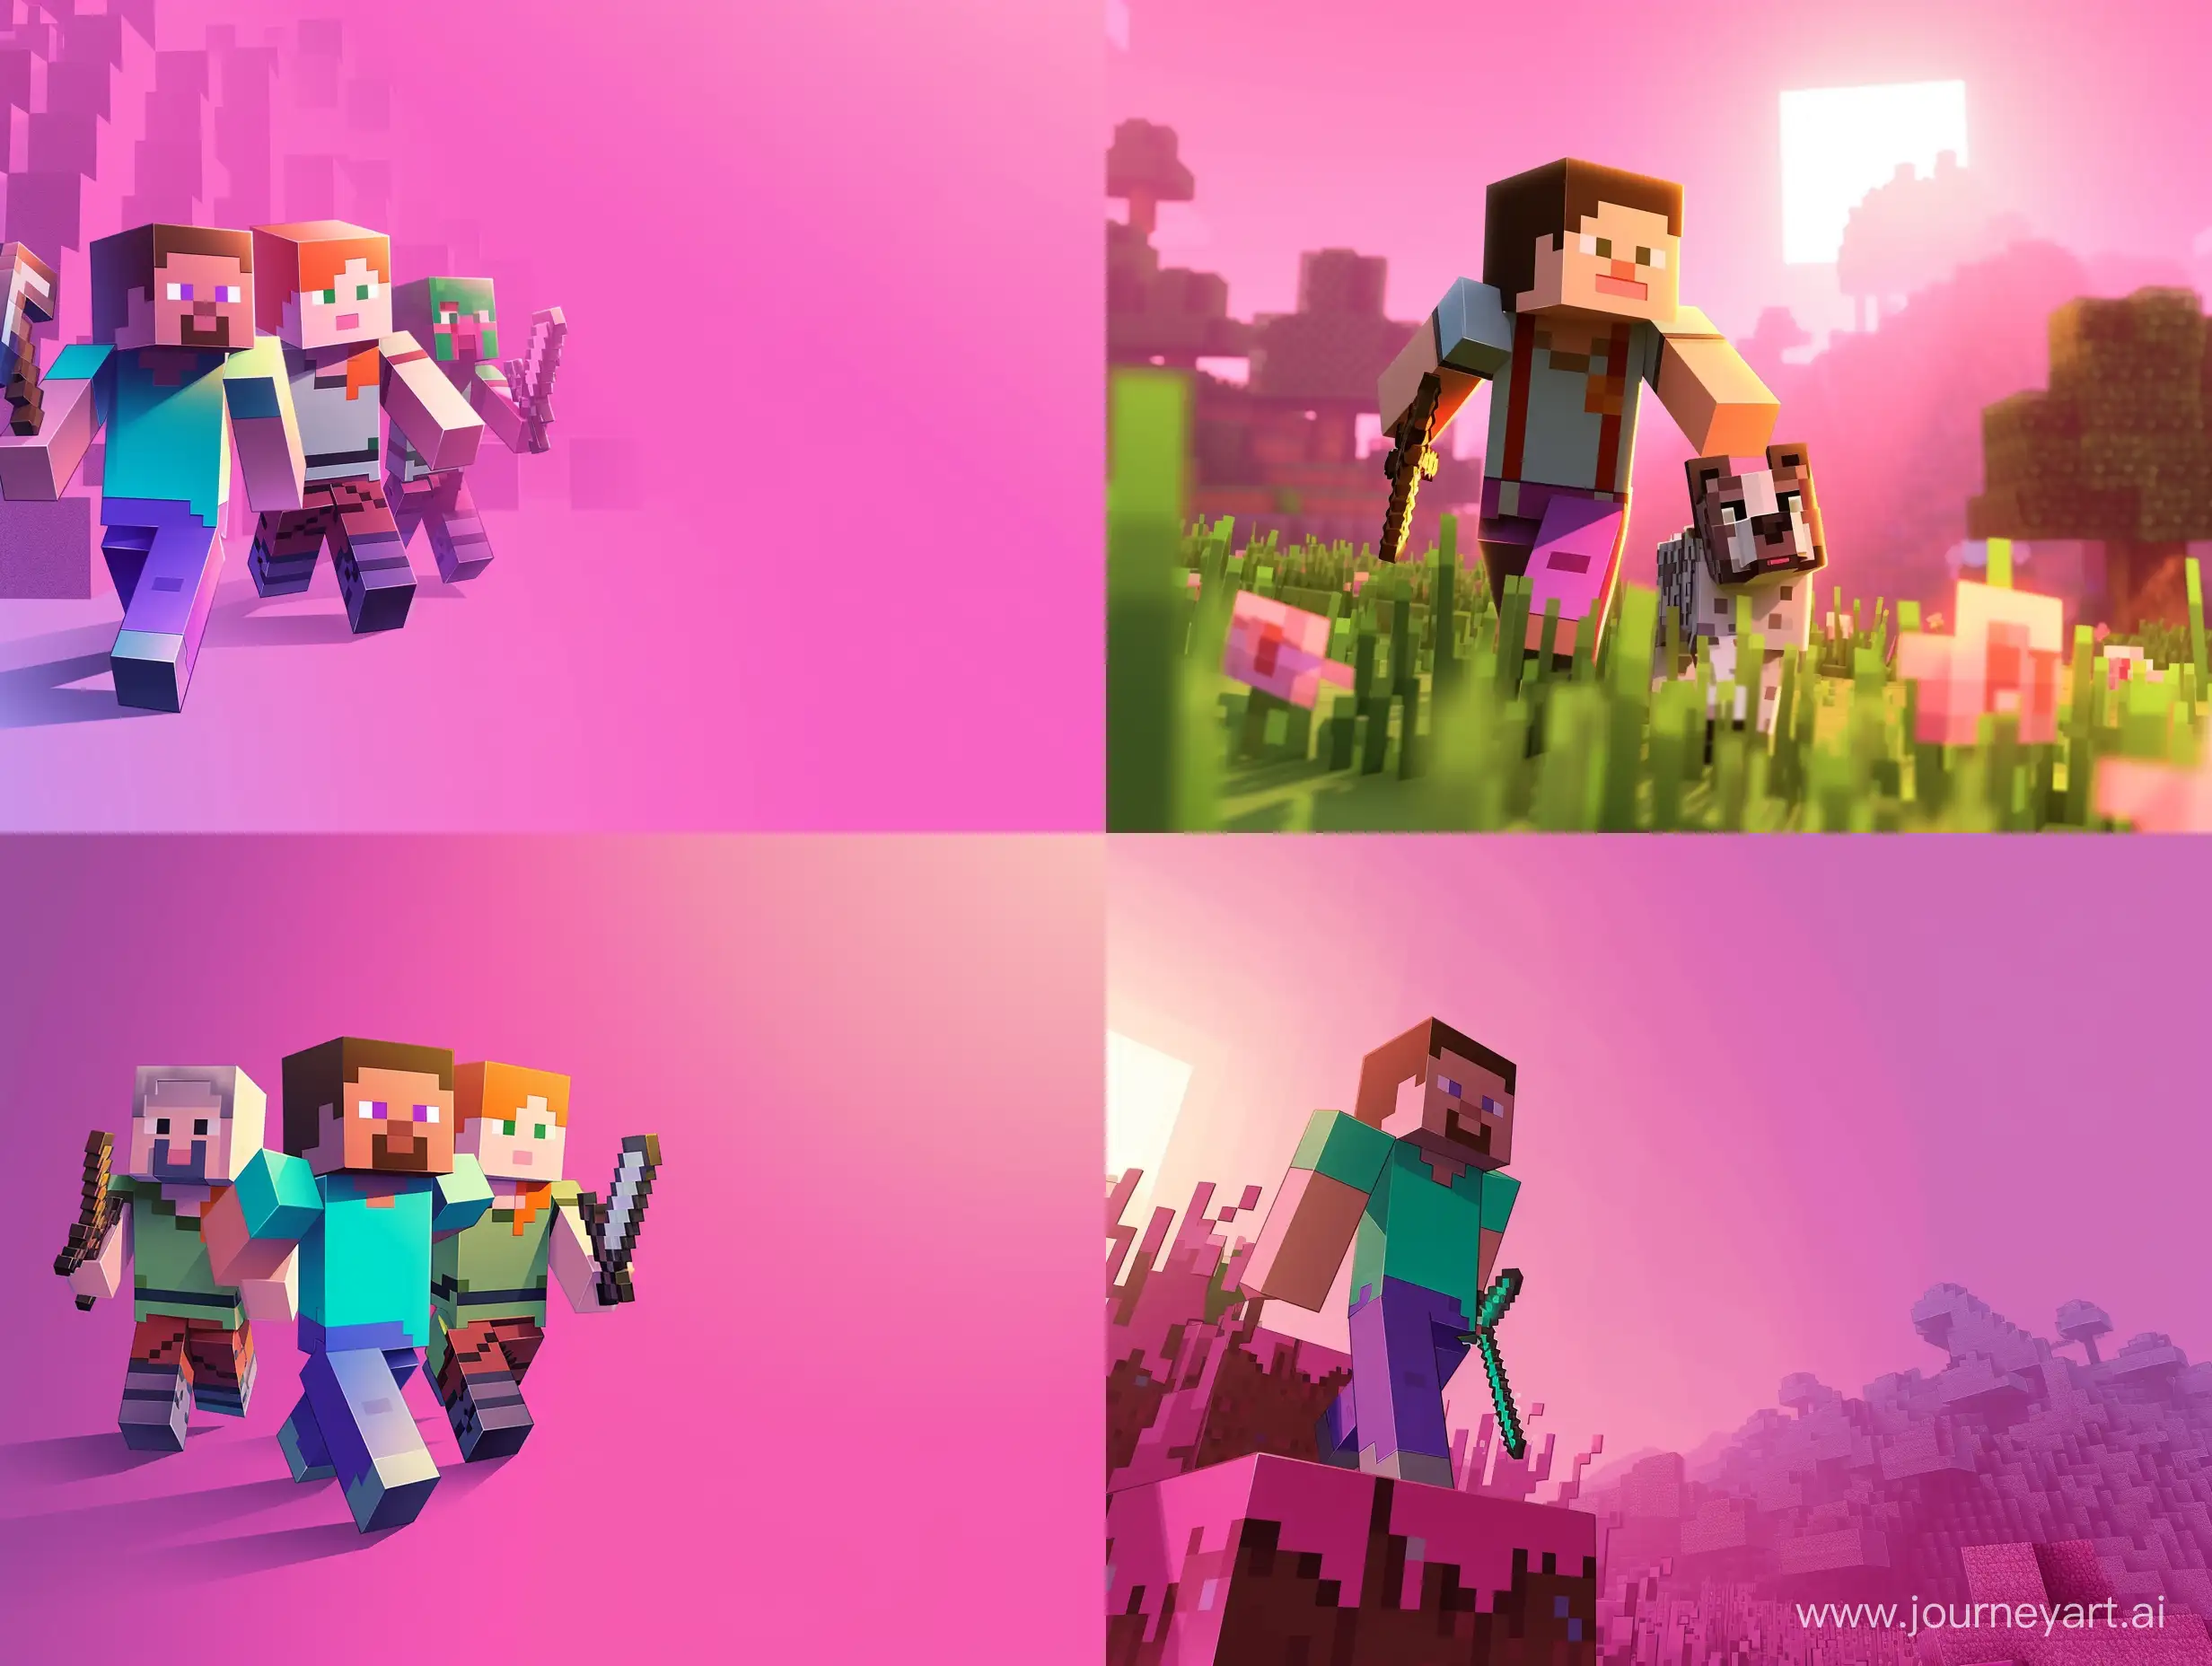 Vibrant-Minecraftthemed-Group-Banner-on-Pink-Gradient-Background